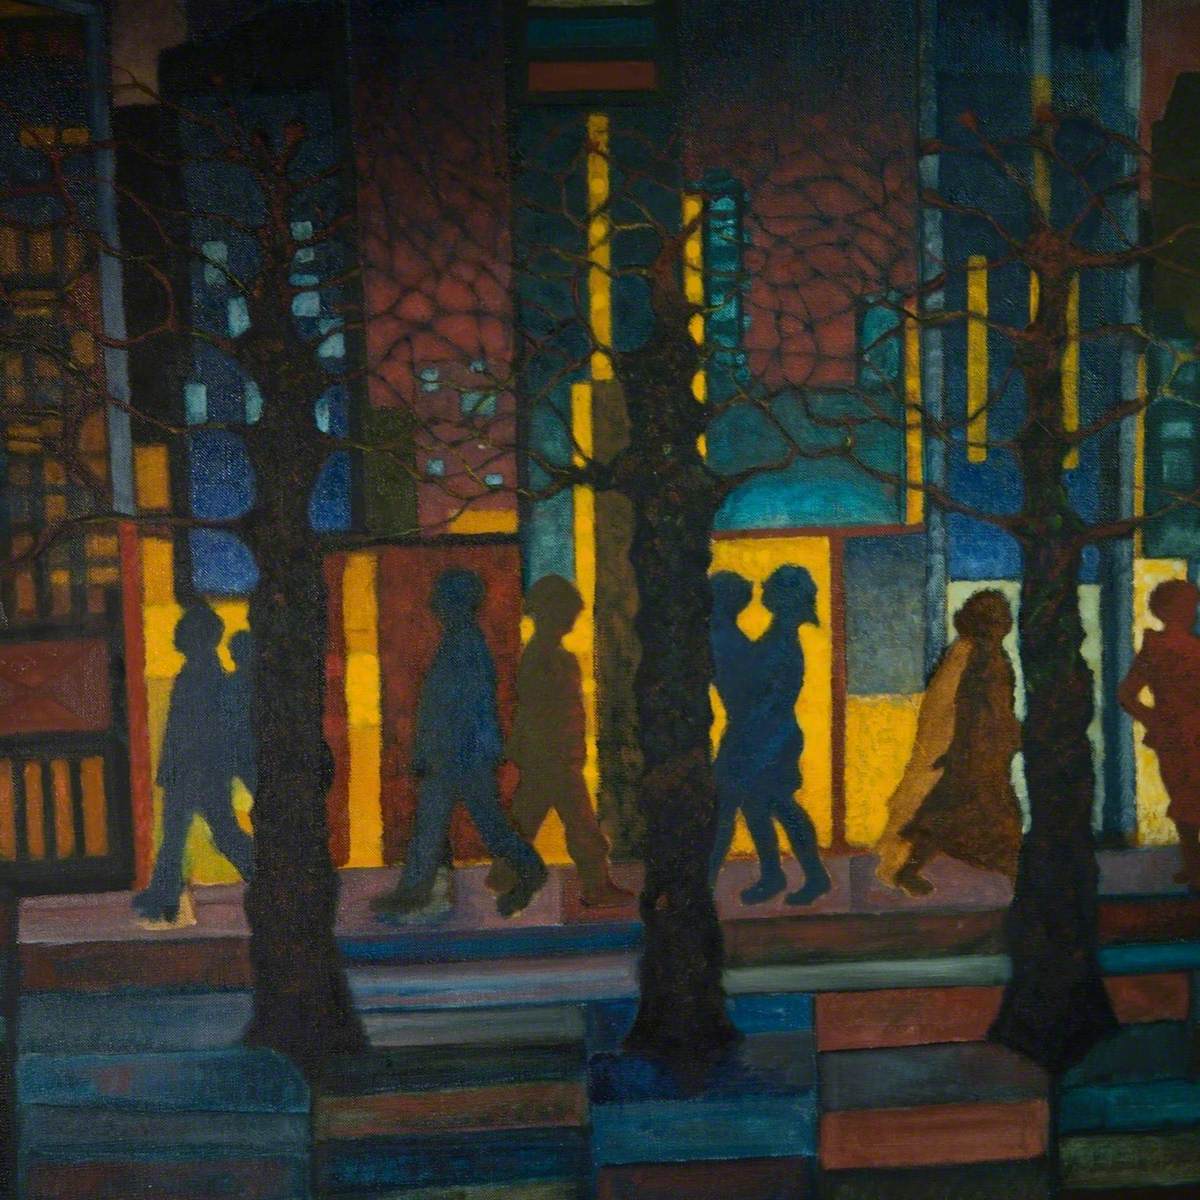 Night Cityscape: Walking by the Trees Under the Night Sky